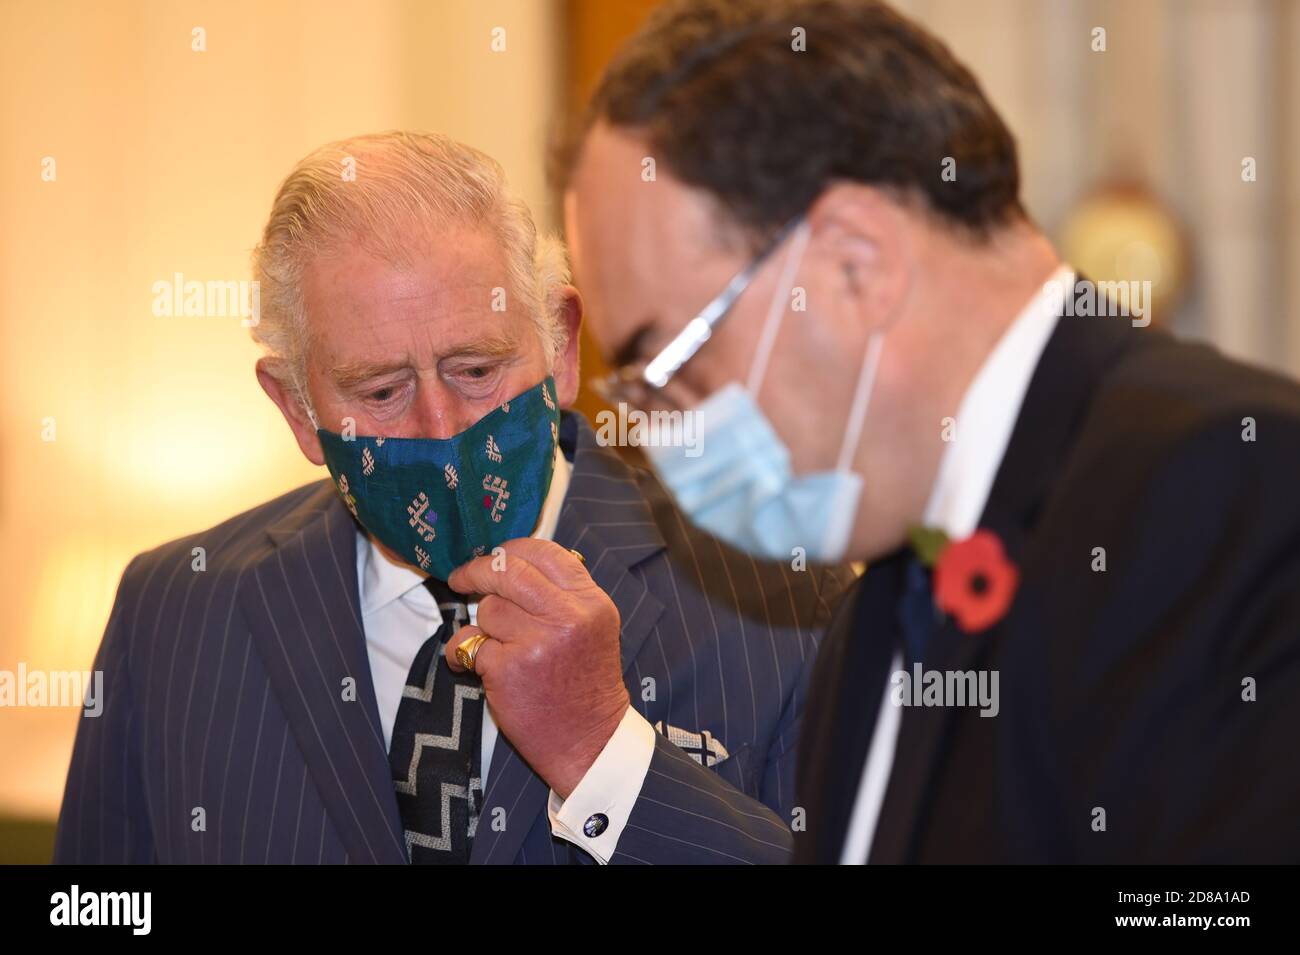 The Prince of Wales during a visit to the headquarters of the Bank of England in the City of London, where he met with Governor Andrew Bailey and reviewed the Bank's role in supporting the national economy through the coronavirus pandemic. Stock Photo